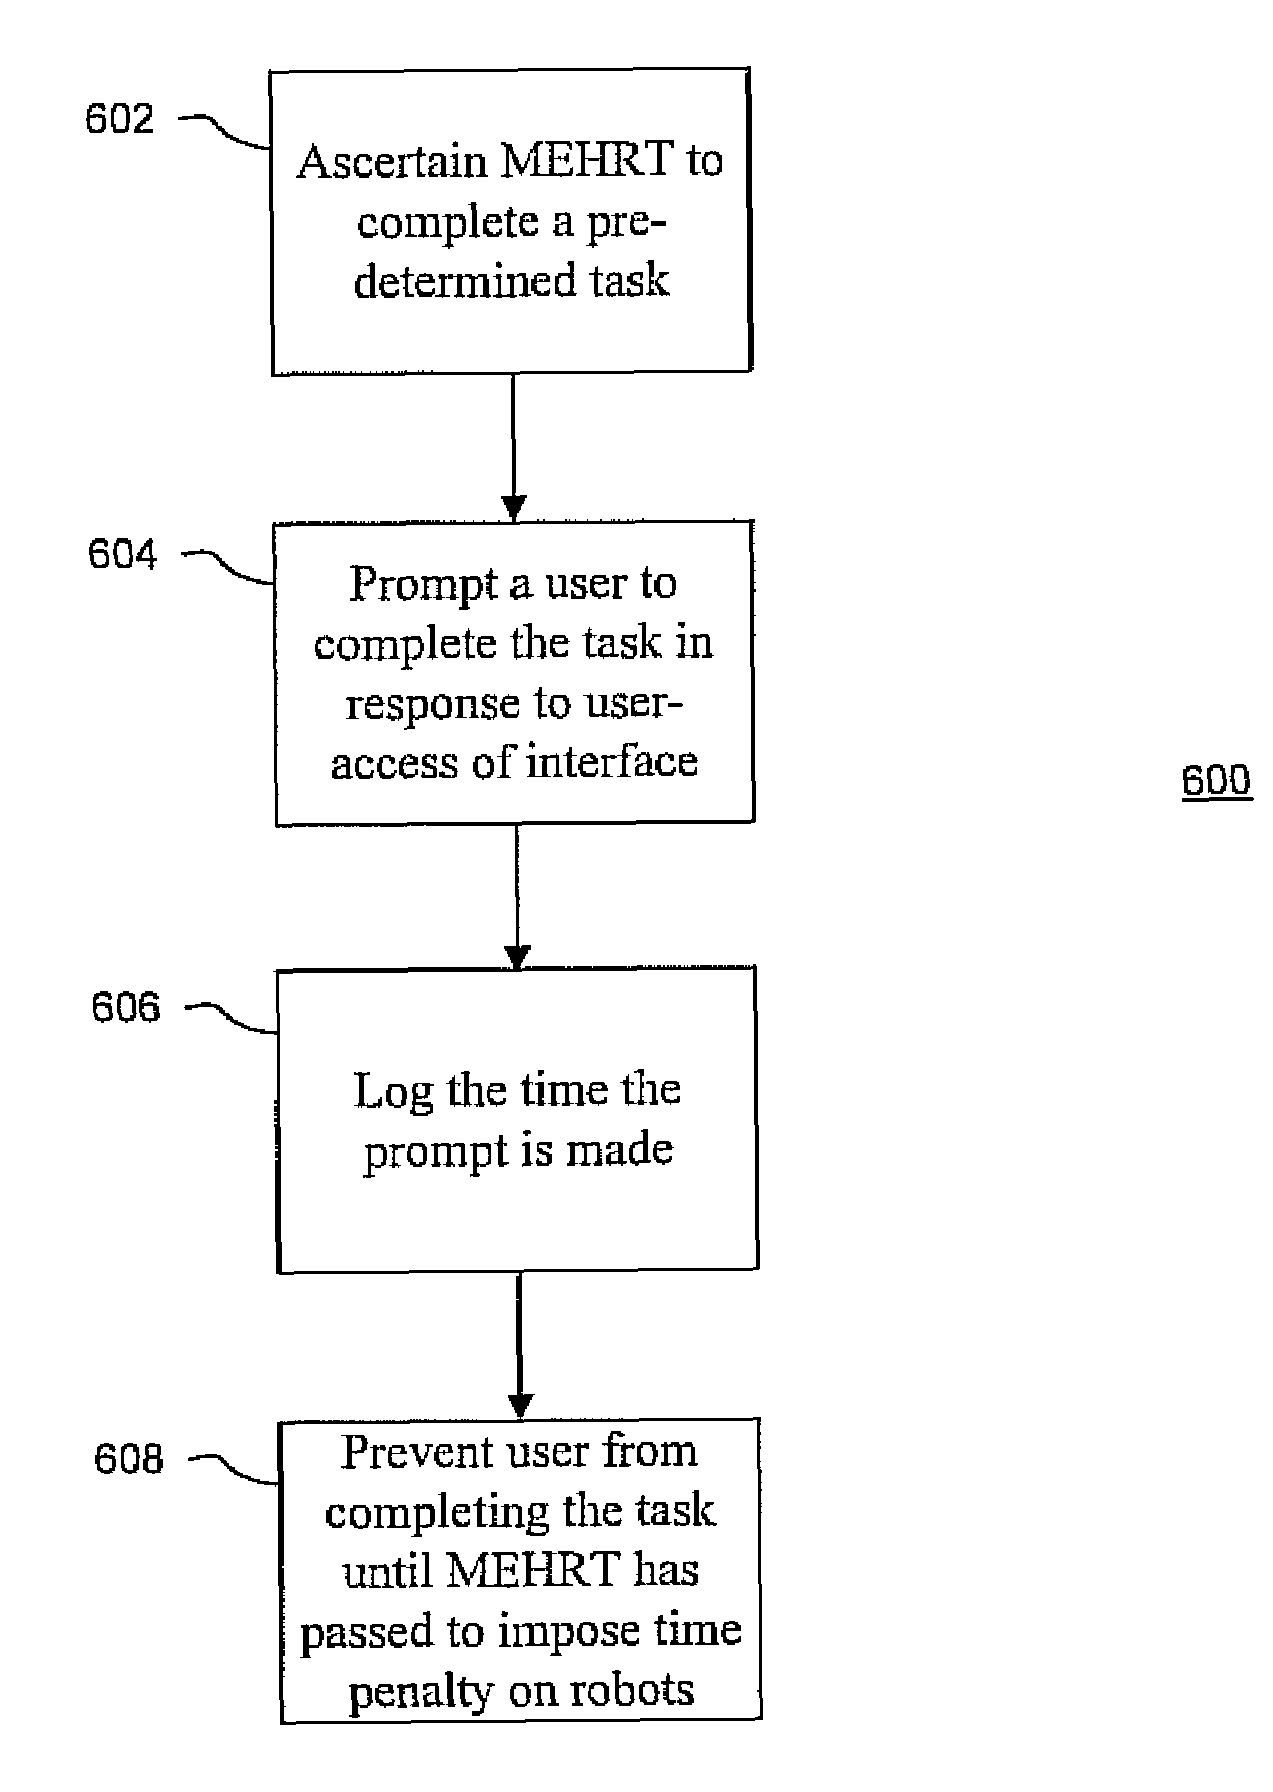 Method and system for detecting and deterring robot access of web-based interfaces by using minimum expected human response time